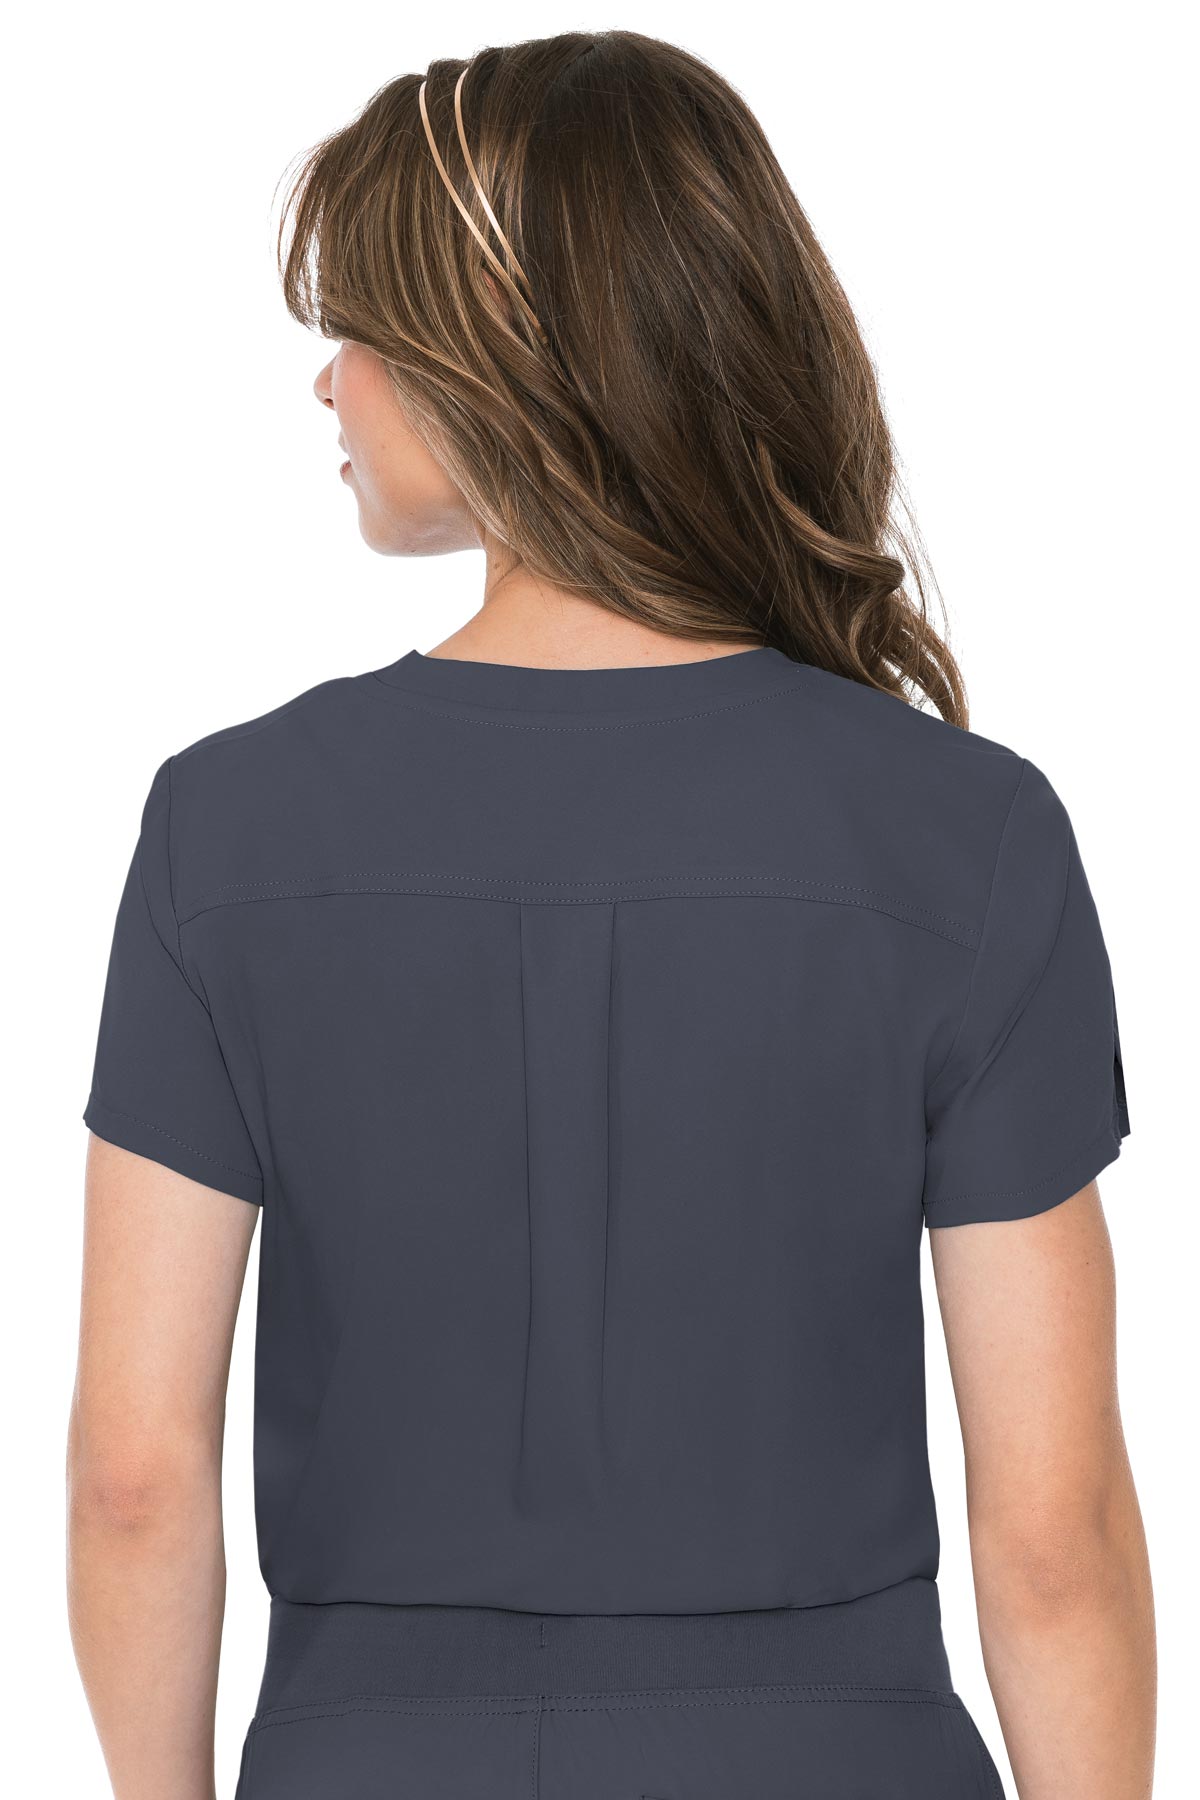 Med Couture 2432 Insight 1 Pocket Women's Tuck-In Top Pewter Back